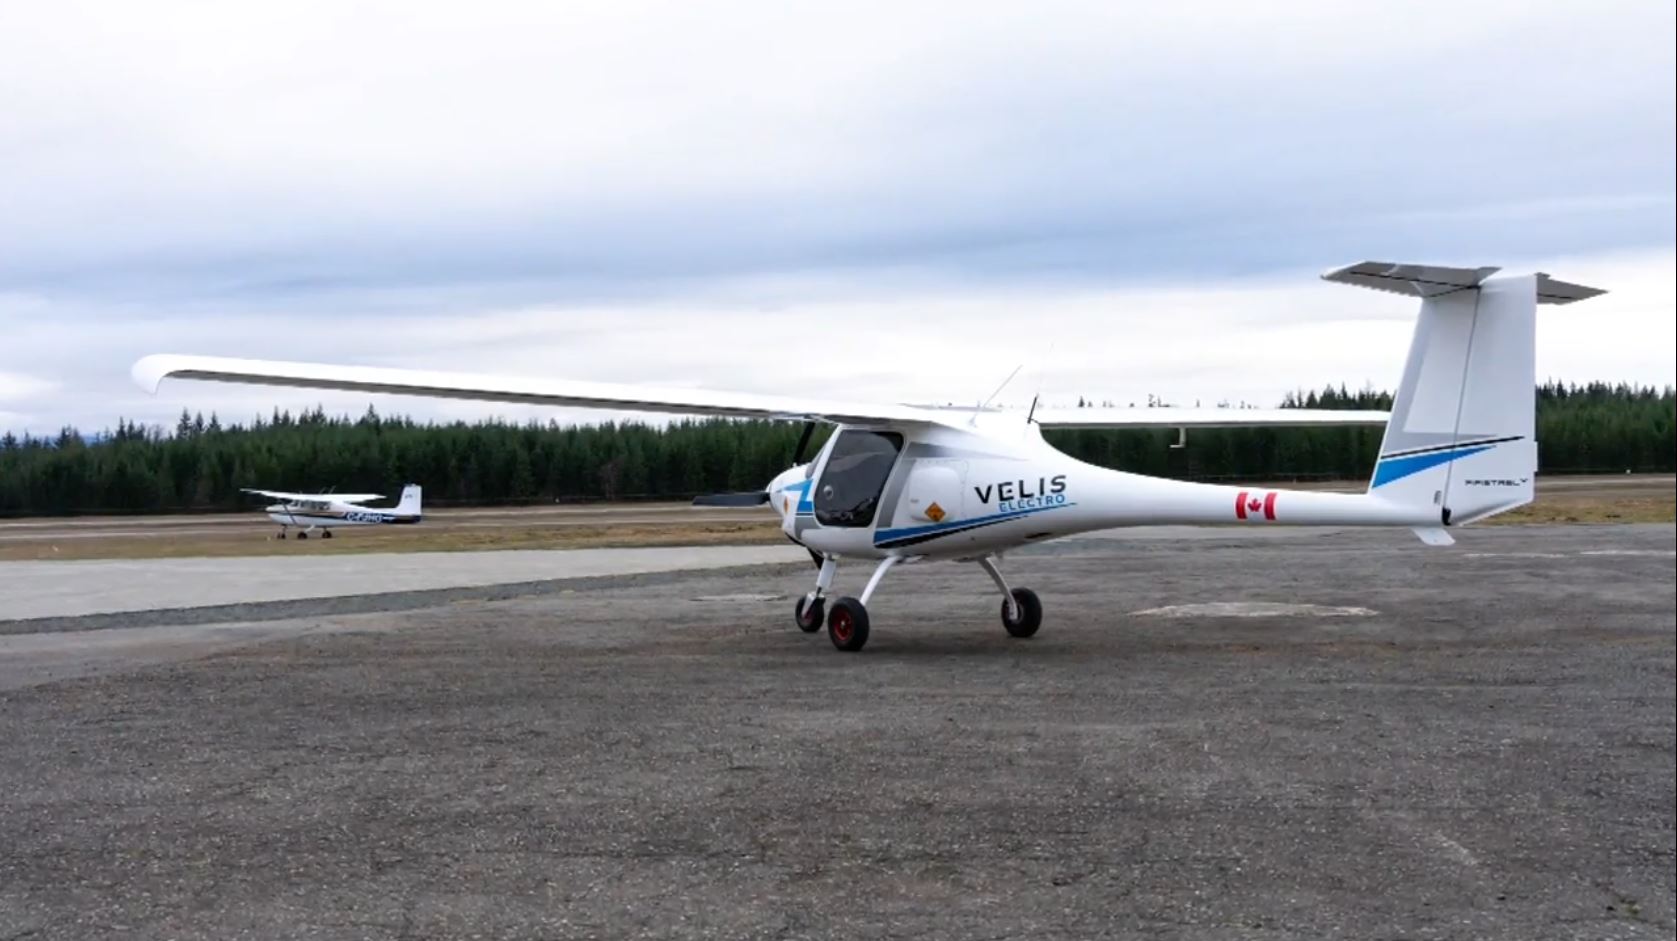 B.C. company using province’s first electric plane for training